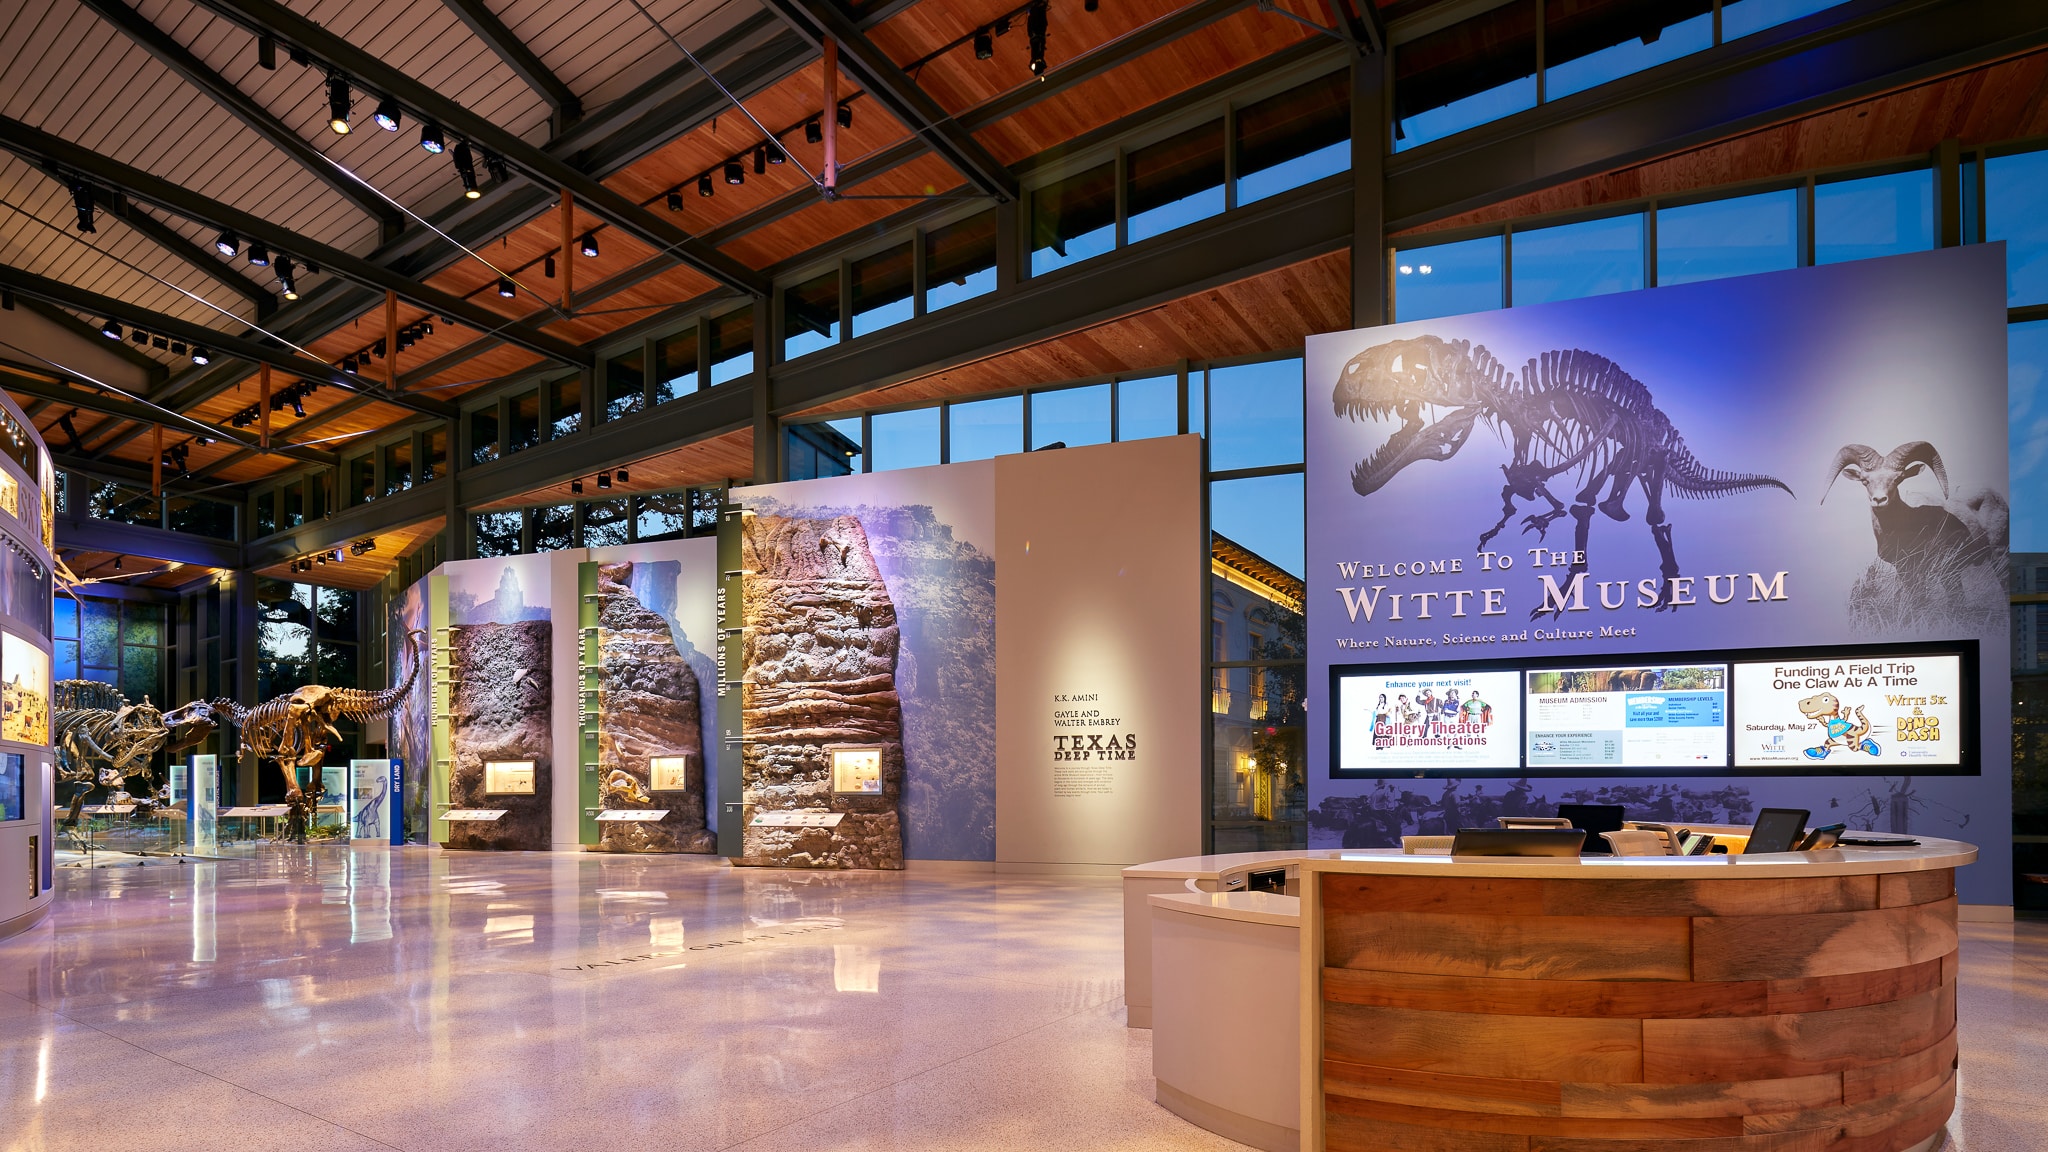 Valero great hall at Witte Museum with dinosaurs, admissions desk, and Texas geology